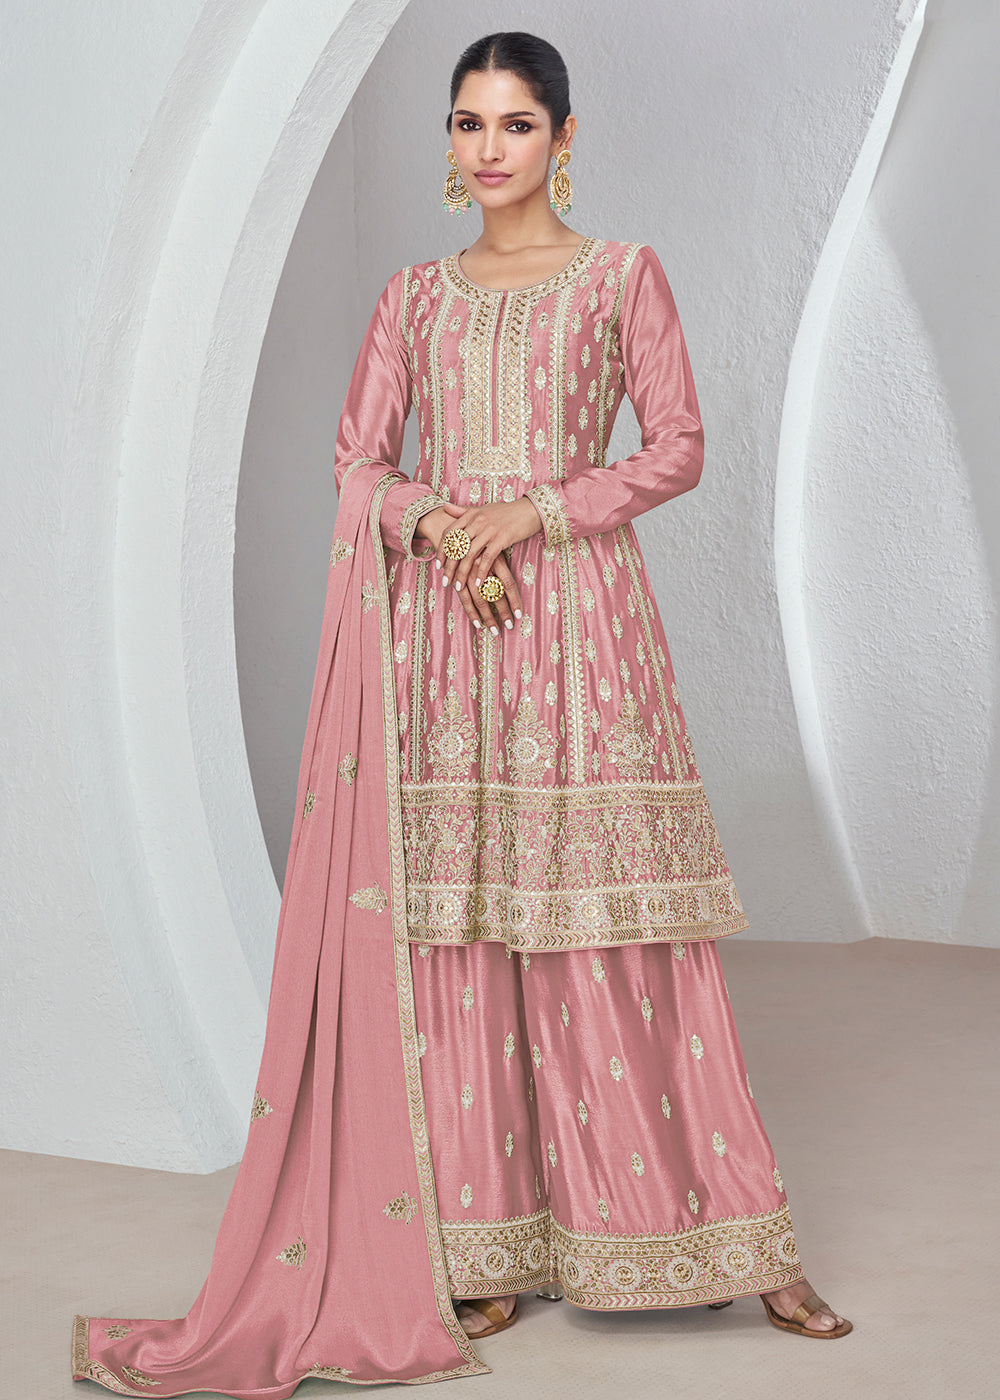 Buy Now Coral Pink Chinnon Silk Wedding Festive Palazzo Dress Online in USA, UK, Canada, Germany, Australia & Worldwide at Empress Clothing. 